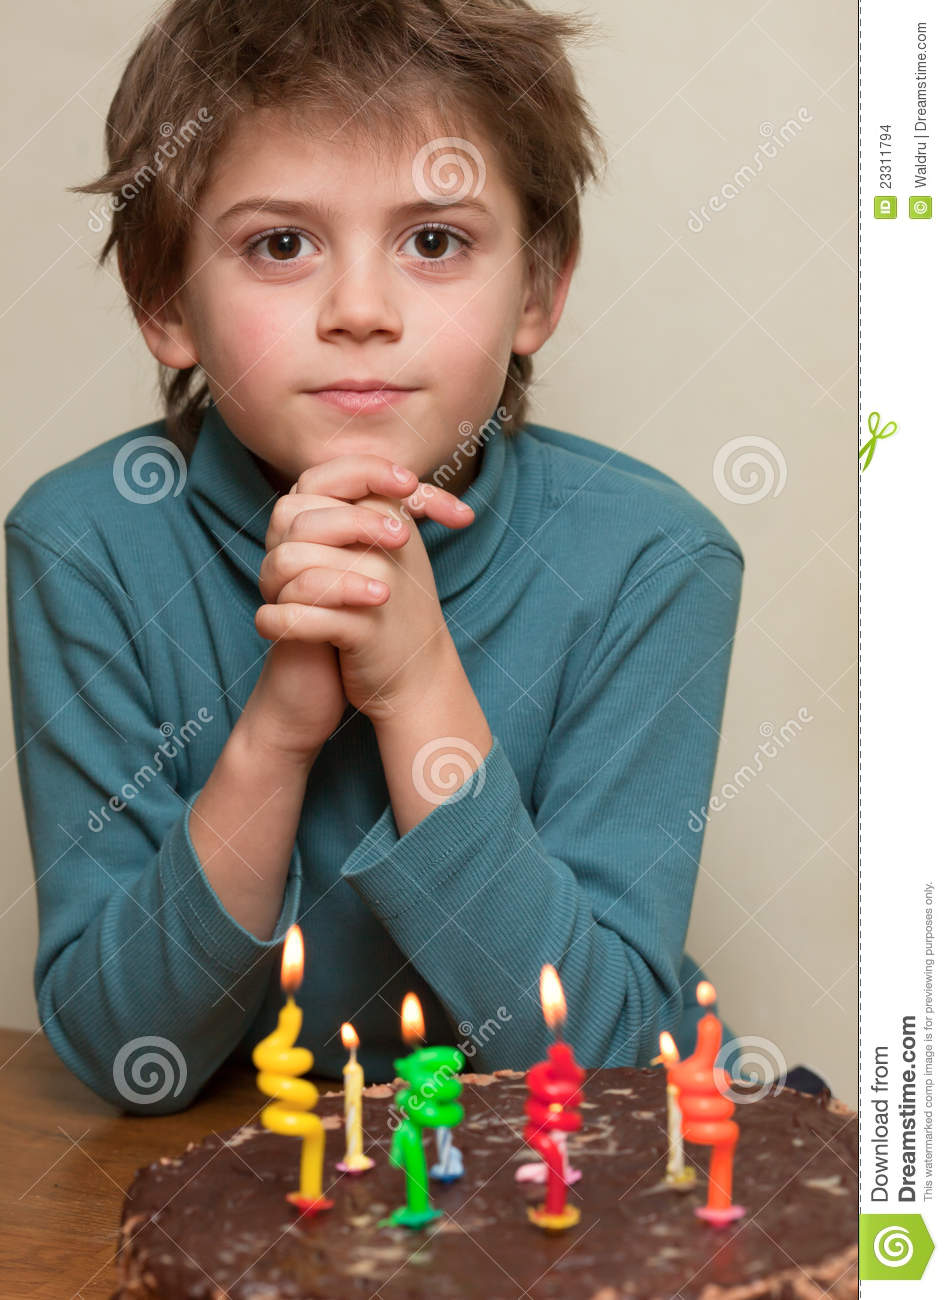 Cute Boy At Birthday Cake Stock Images   Image  23311794